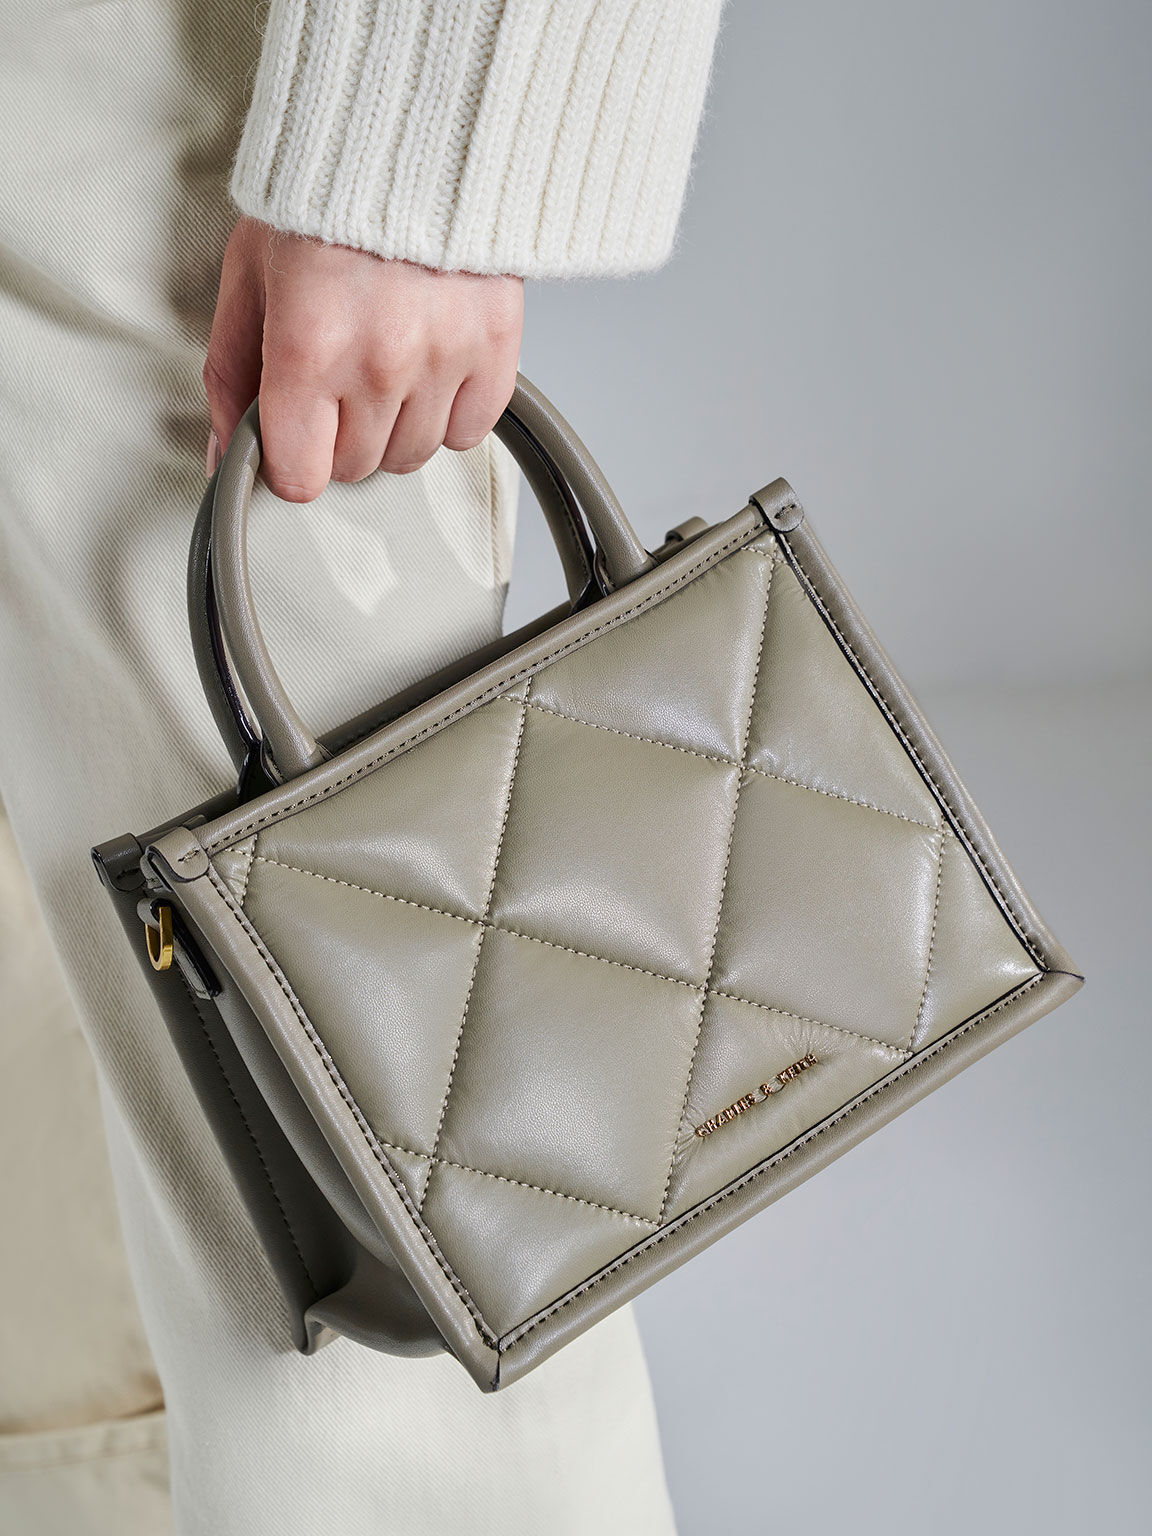 TÚI ĐEO CHÉO CHARLES KEITH QUILTED DOUBLE HANDLE TOTE BAG 27